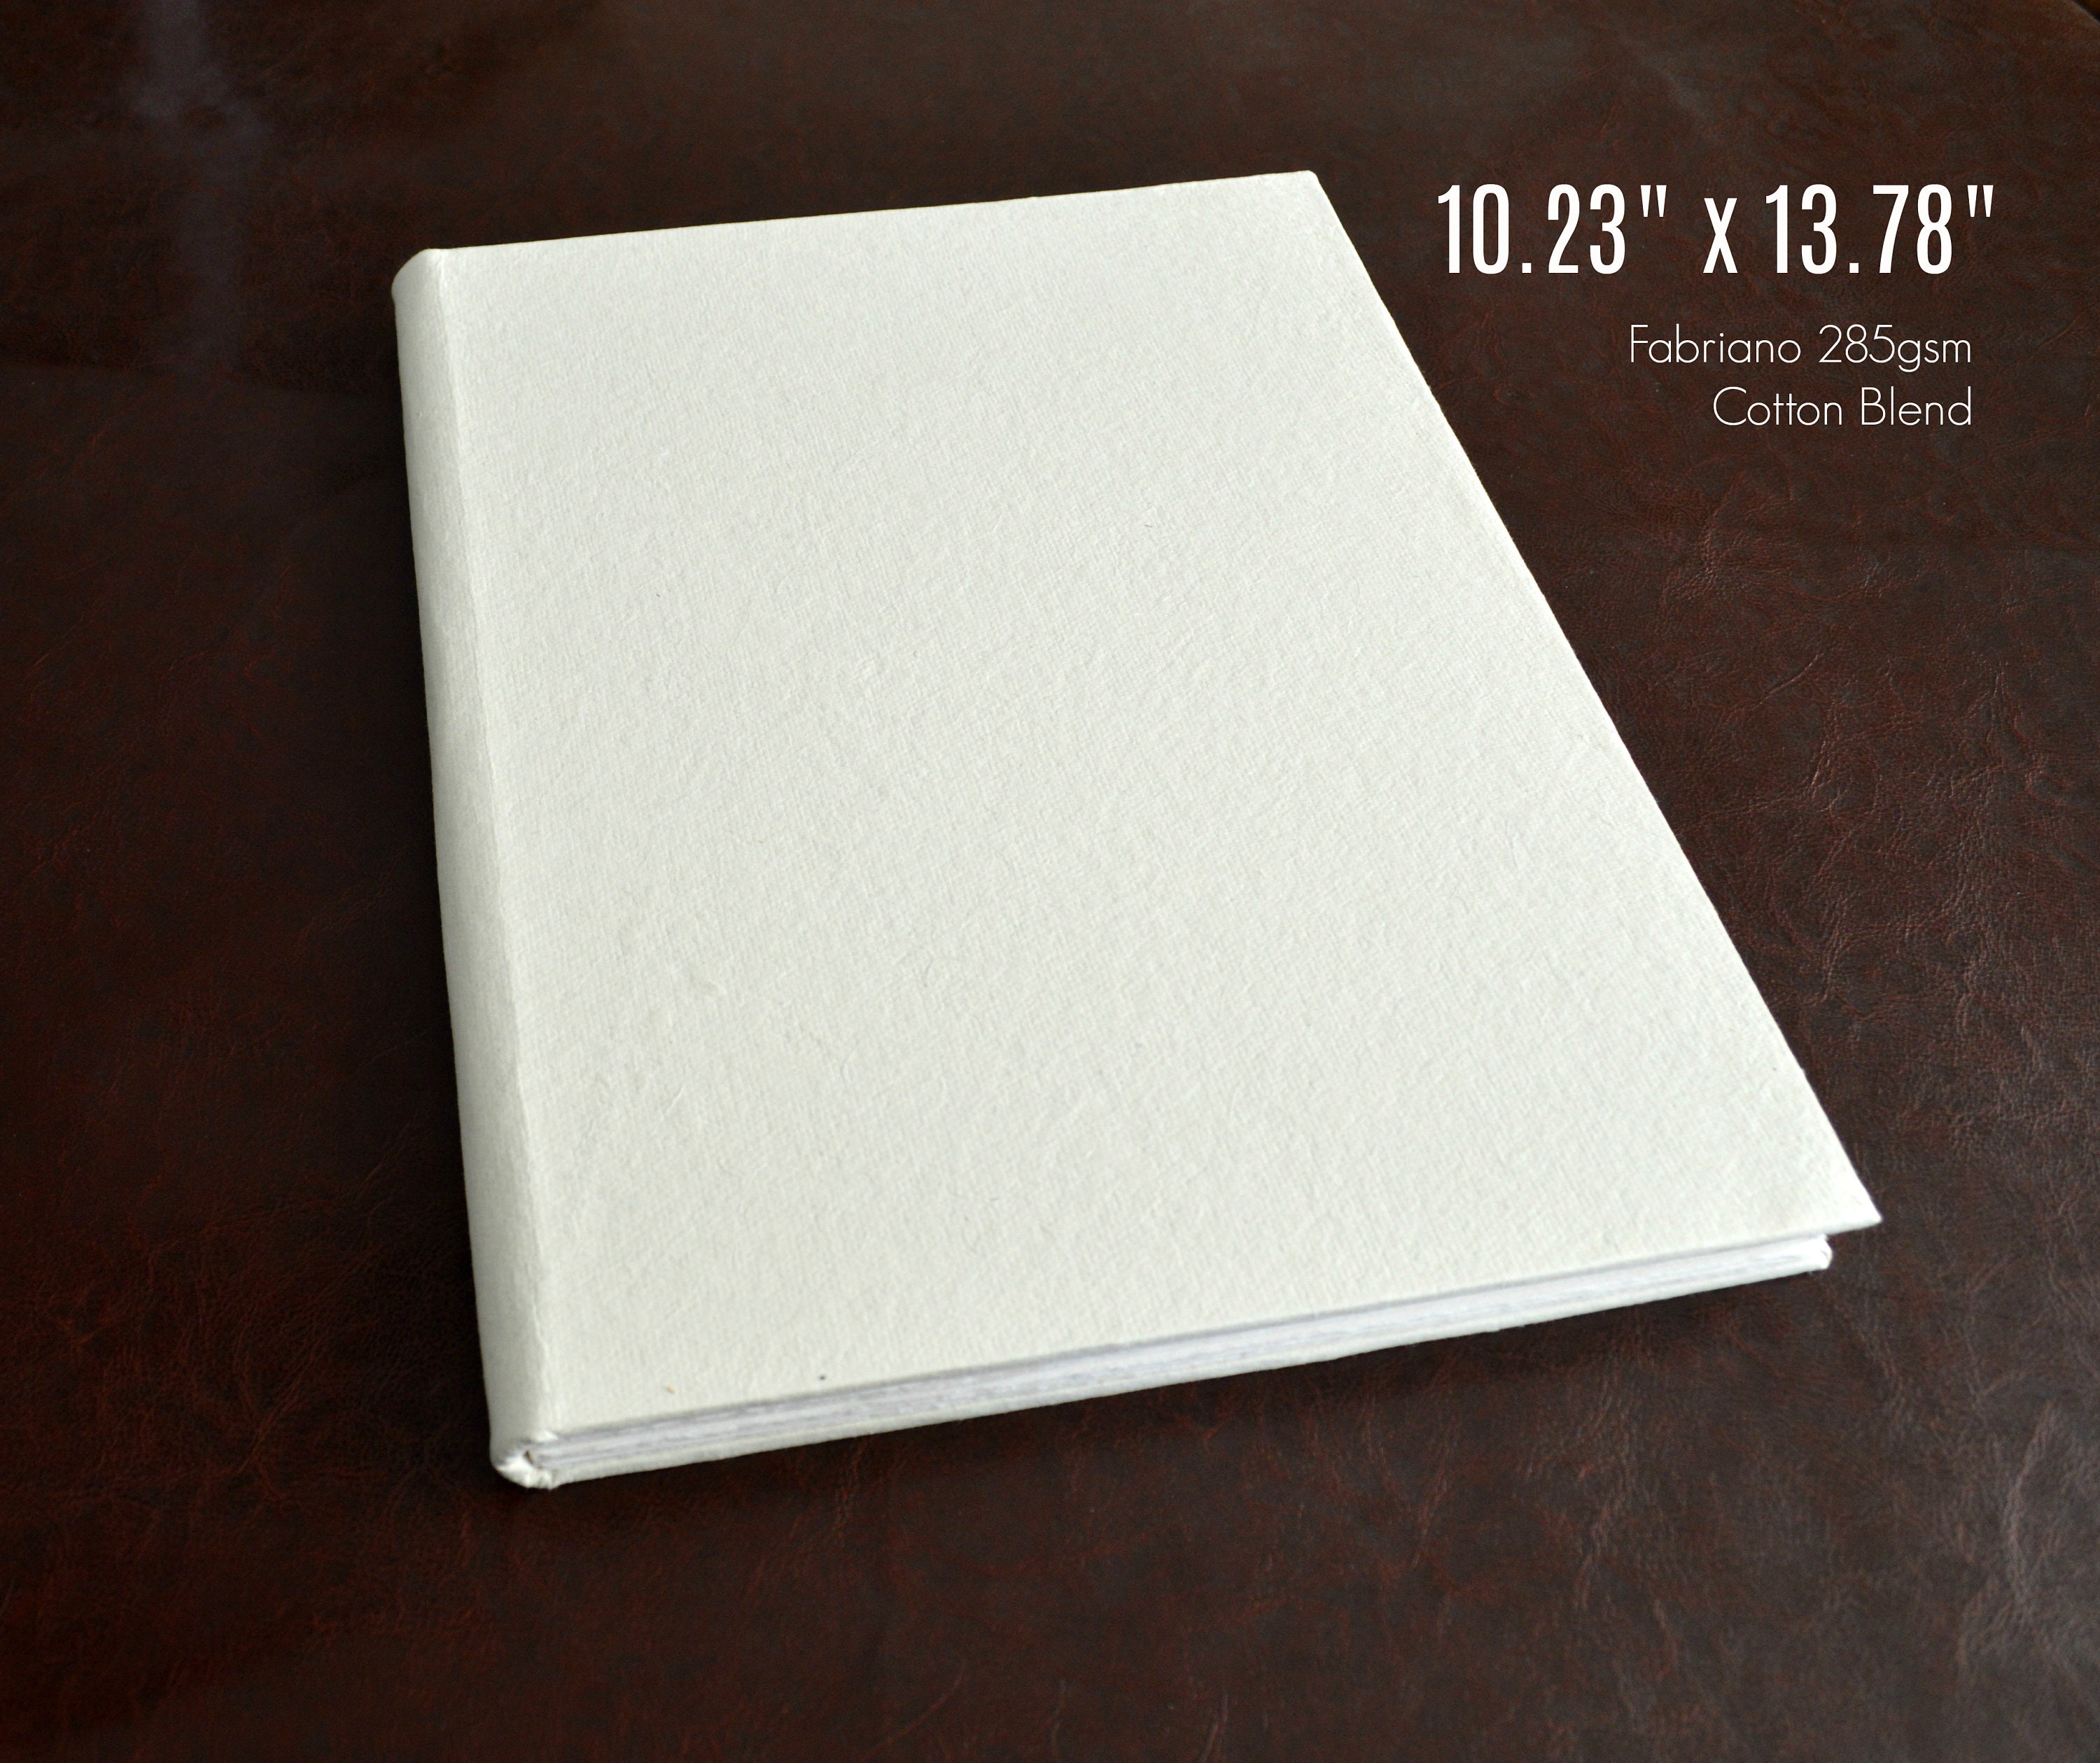 Large Pl Leather Sketchbook With Cotton Watercolor Paper in